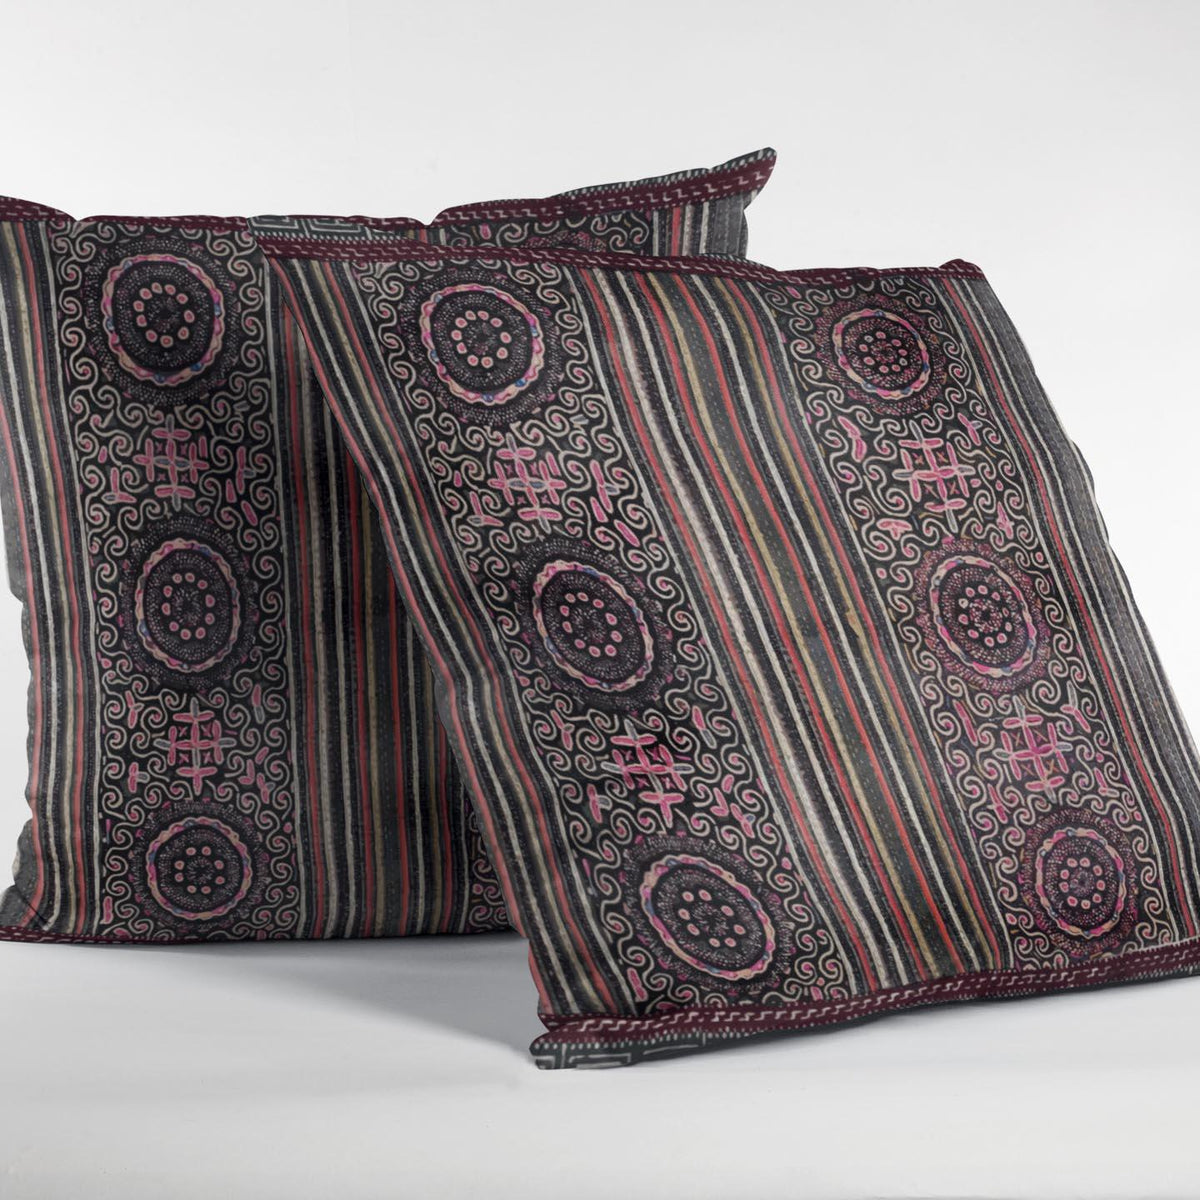 Tribal Pillow Miao Culture Inspired (Central Asian) Tribal Pillows | Throw Pillows